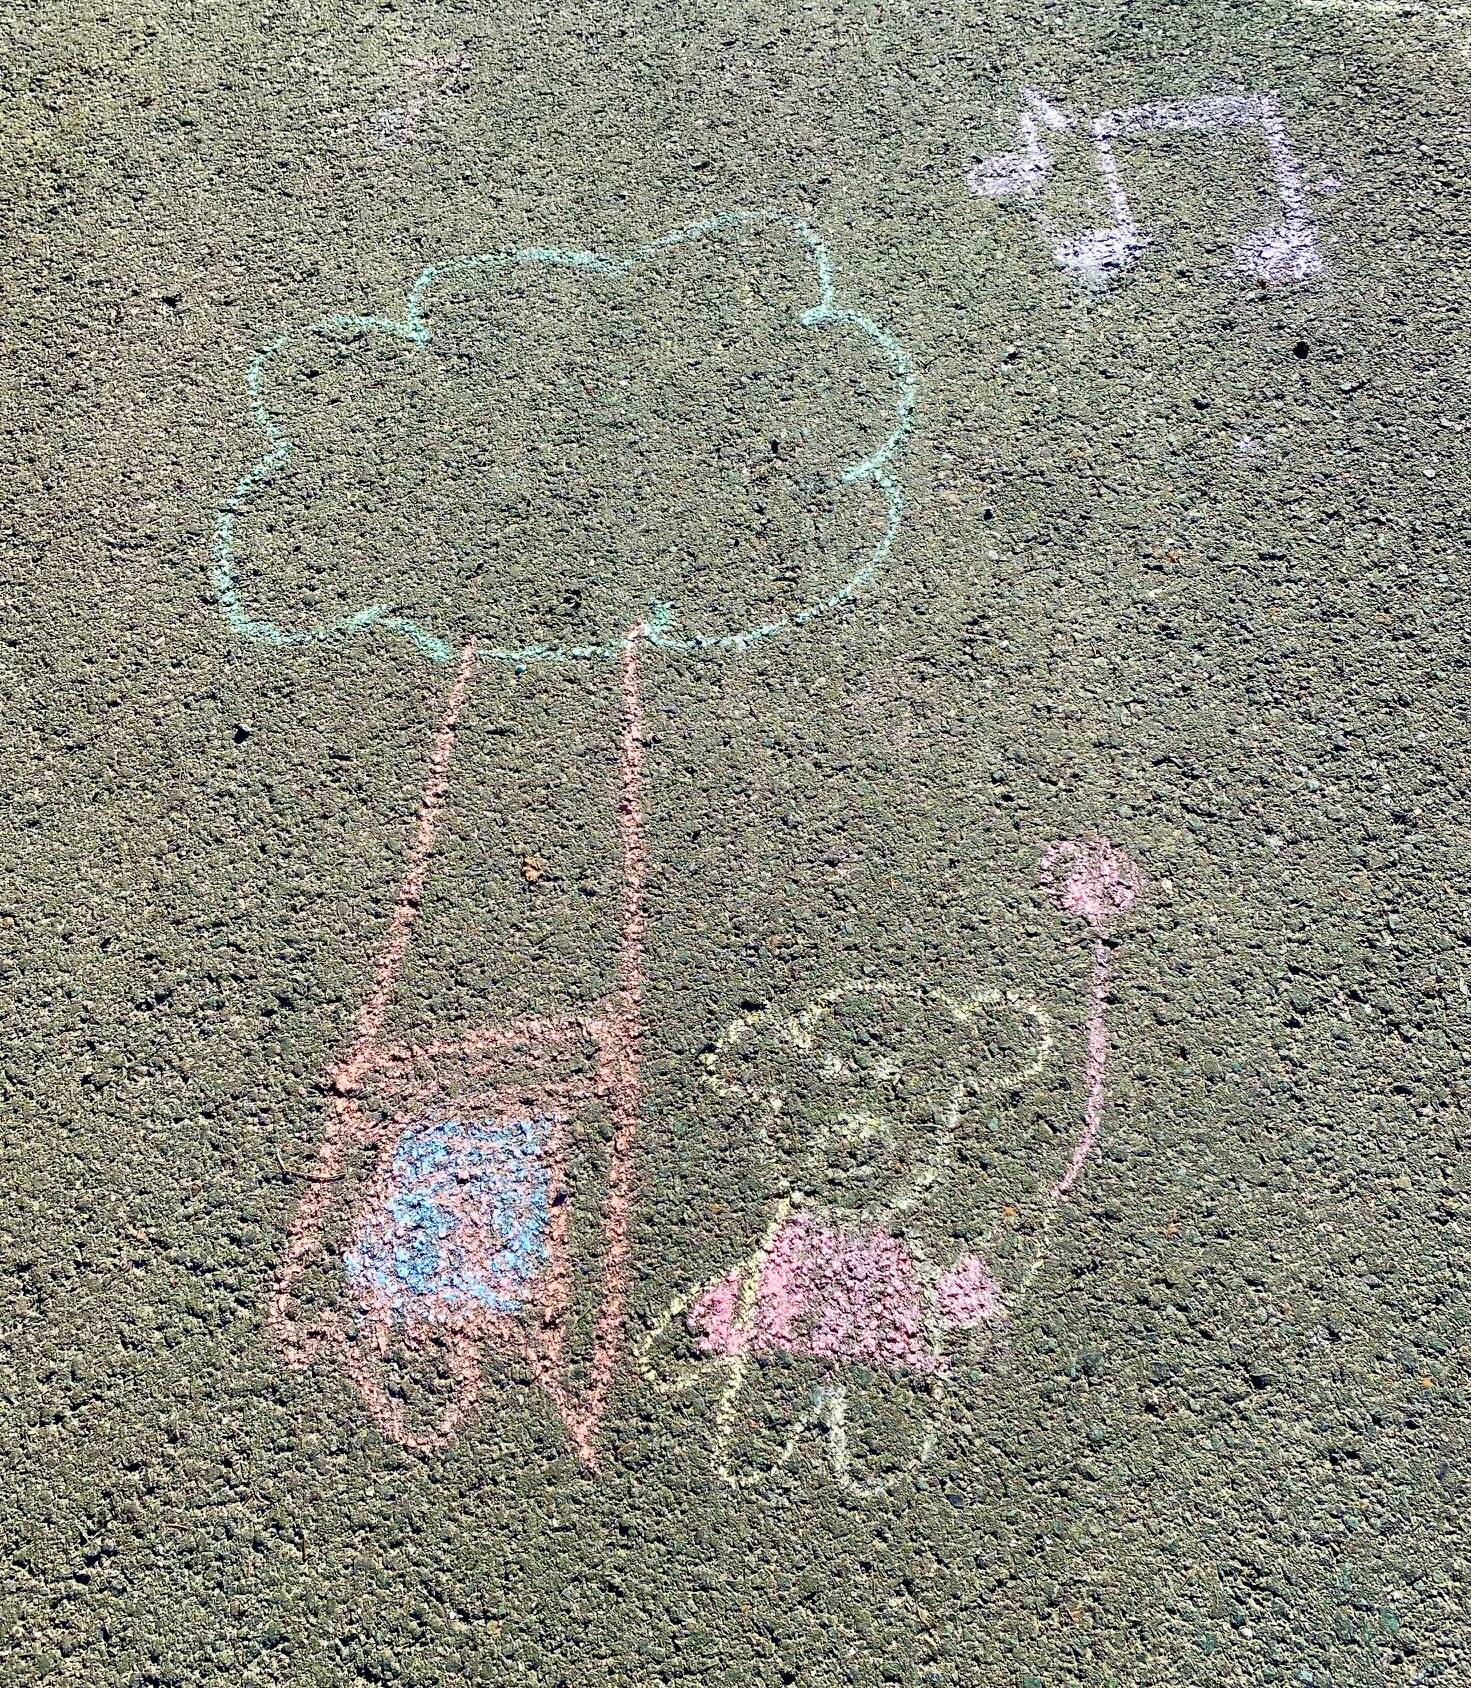 Happy days are here again as depicted in a sidewalk chalk drawing in a downtown driveway on Aug. 28. (Photo by Denise Carroll)